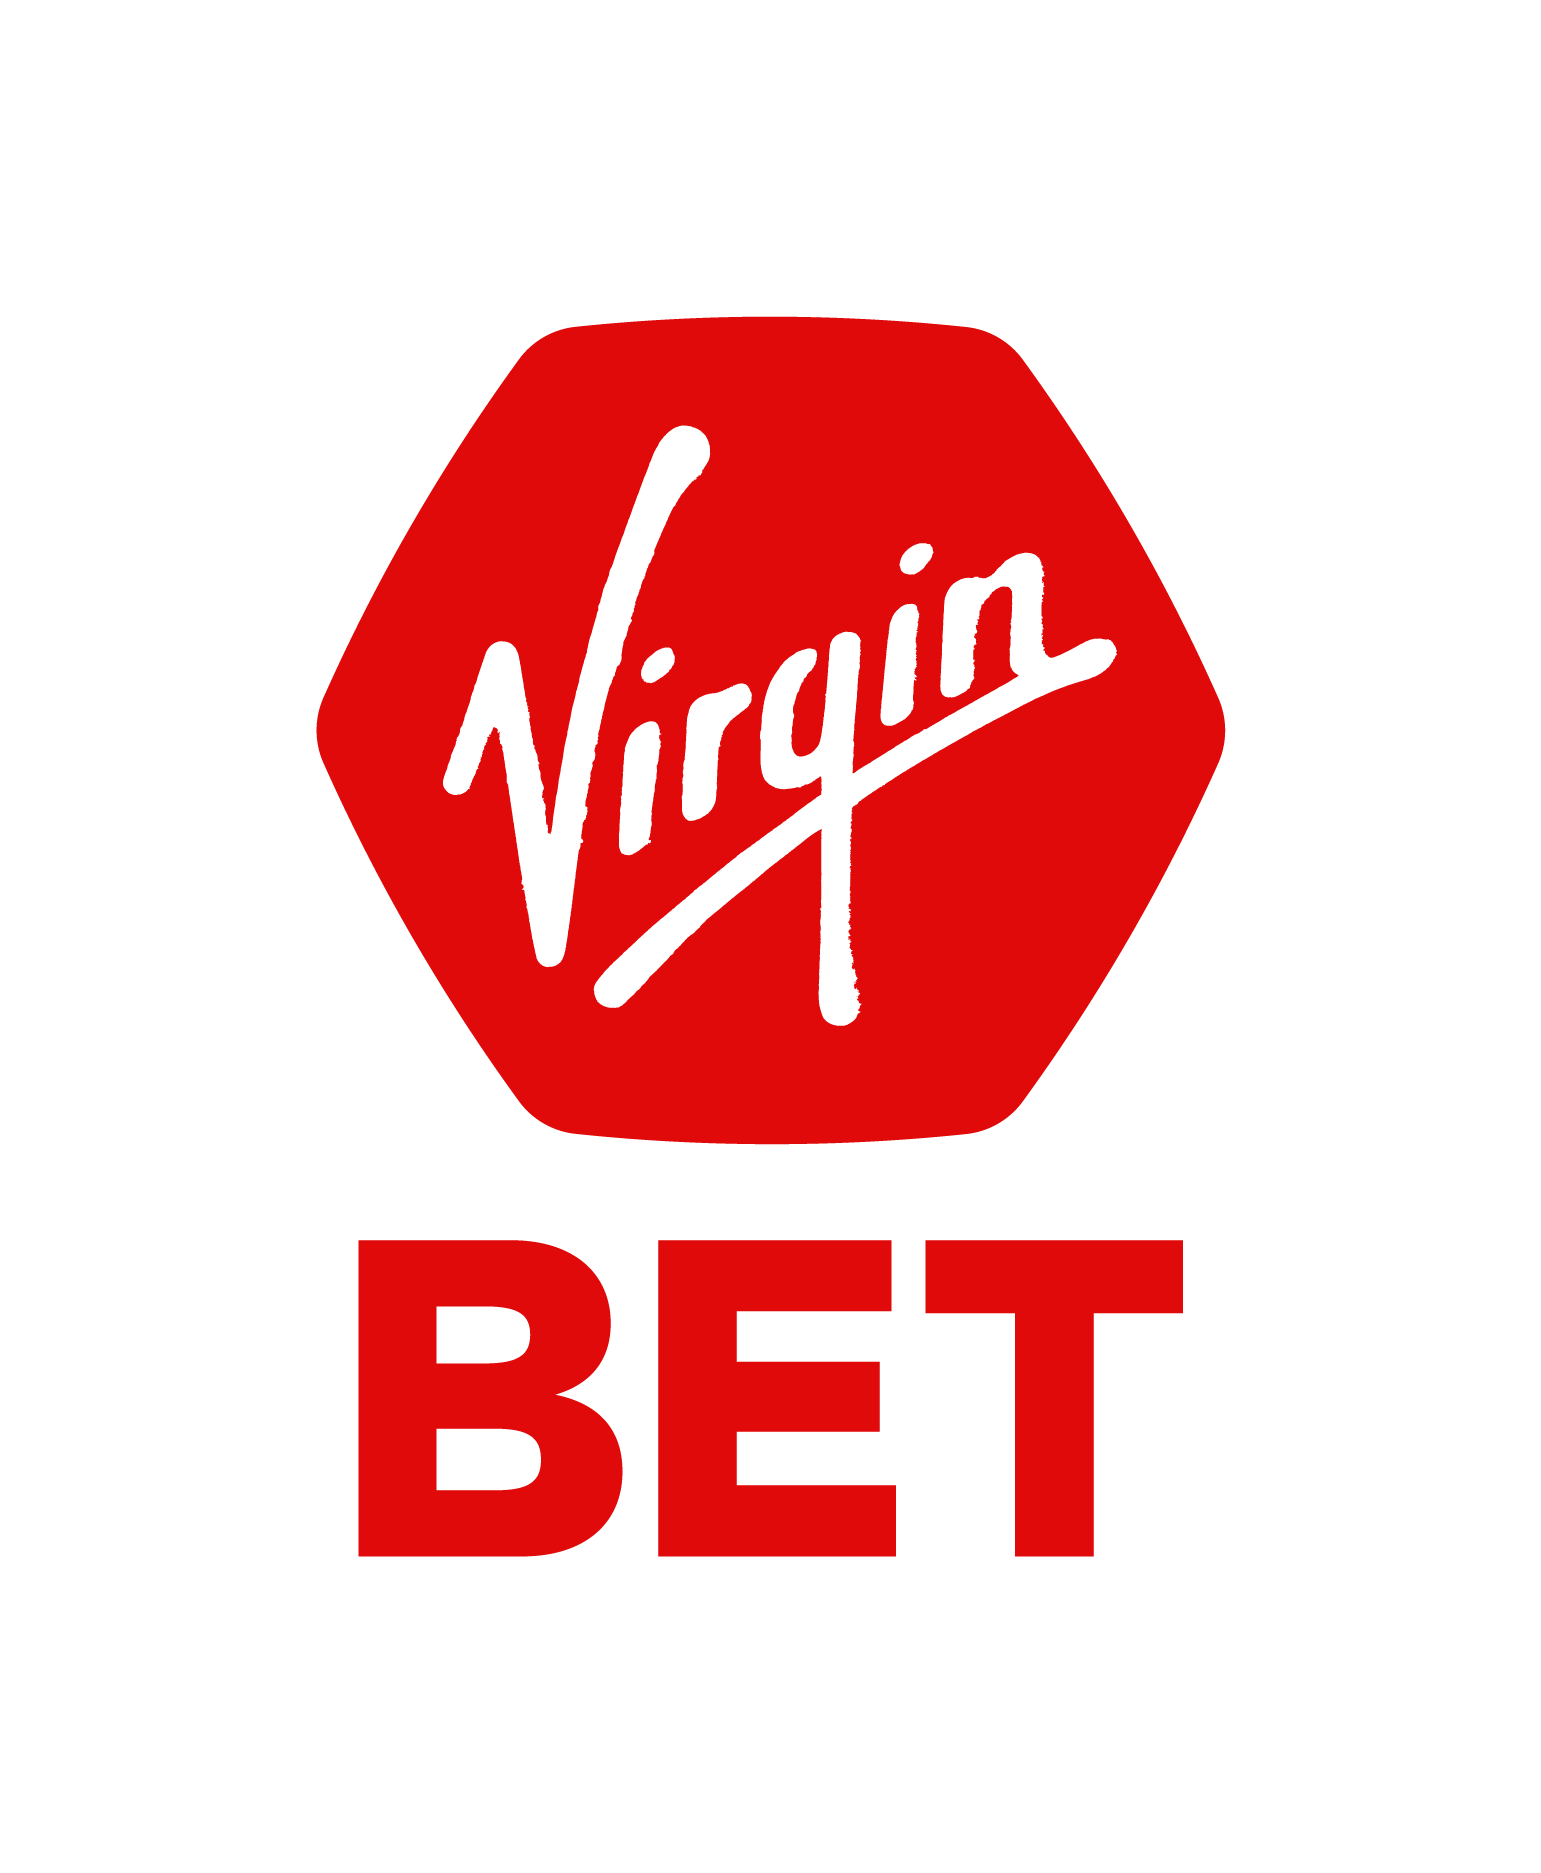 Virgin Bet logo in red - on a white background.